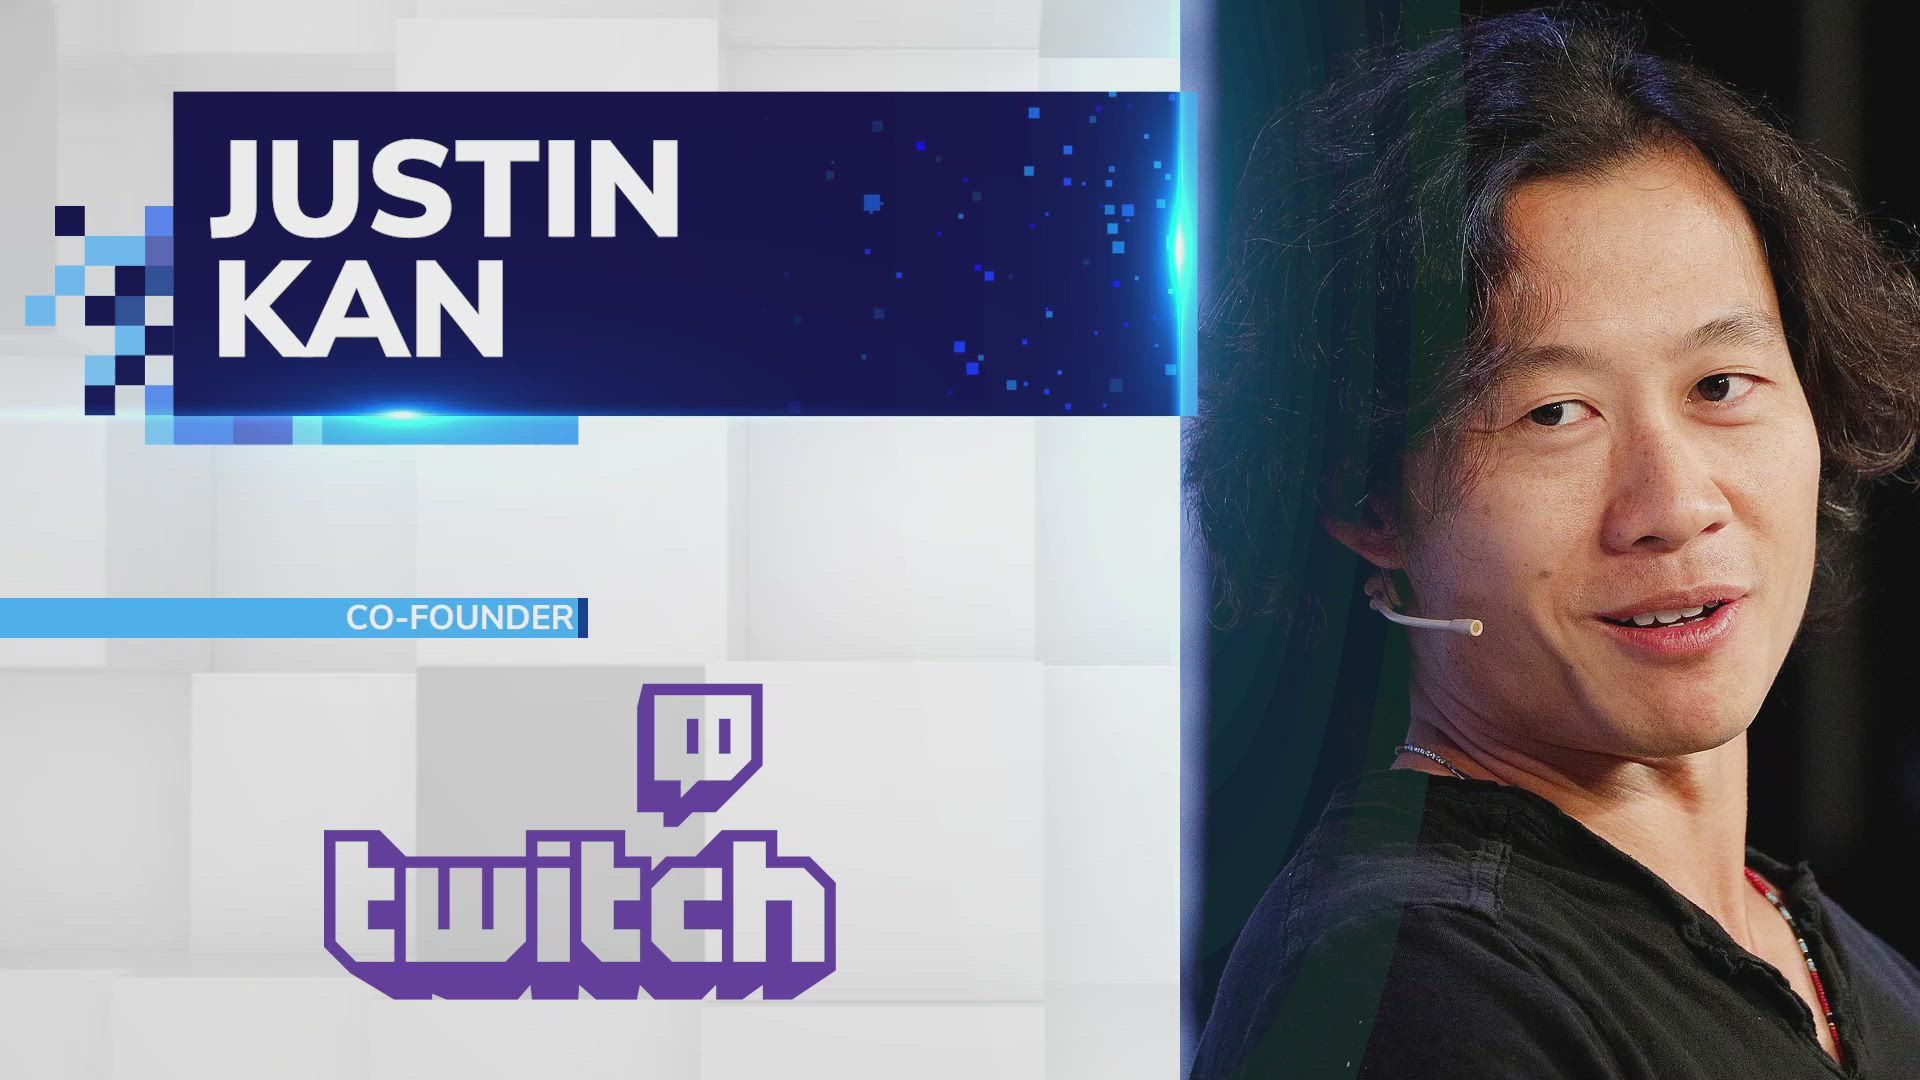 Justin Kan, Co-Founder of Twitch | FINTECH.TV